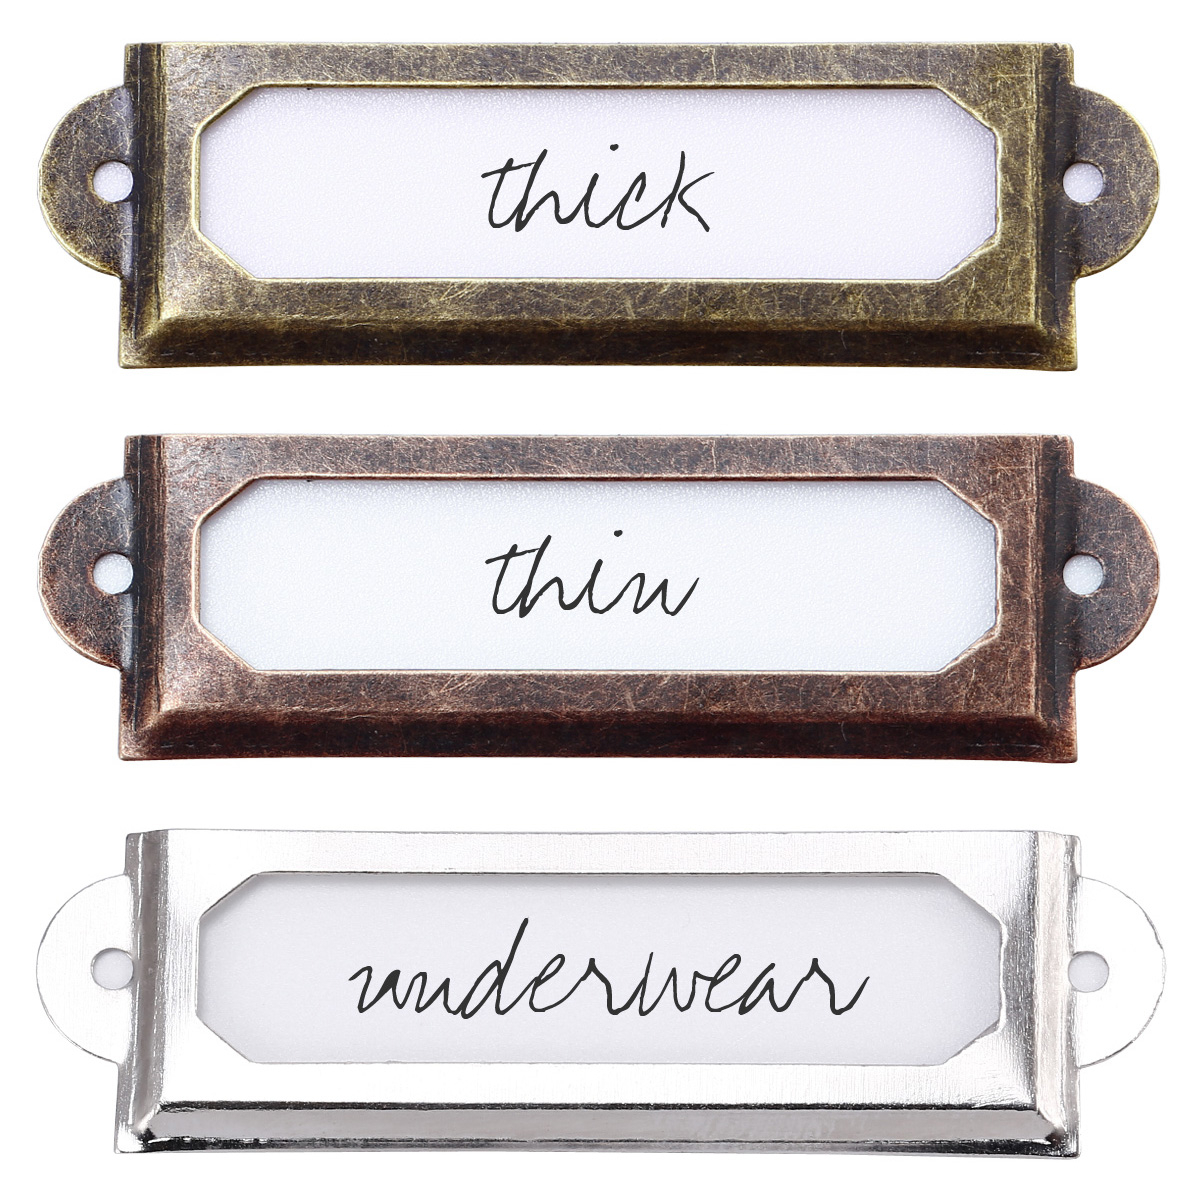 Metal Label Holders For File Cabinets • Cabinet Ideas